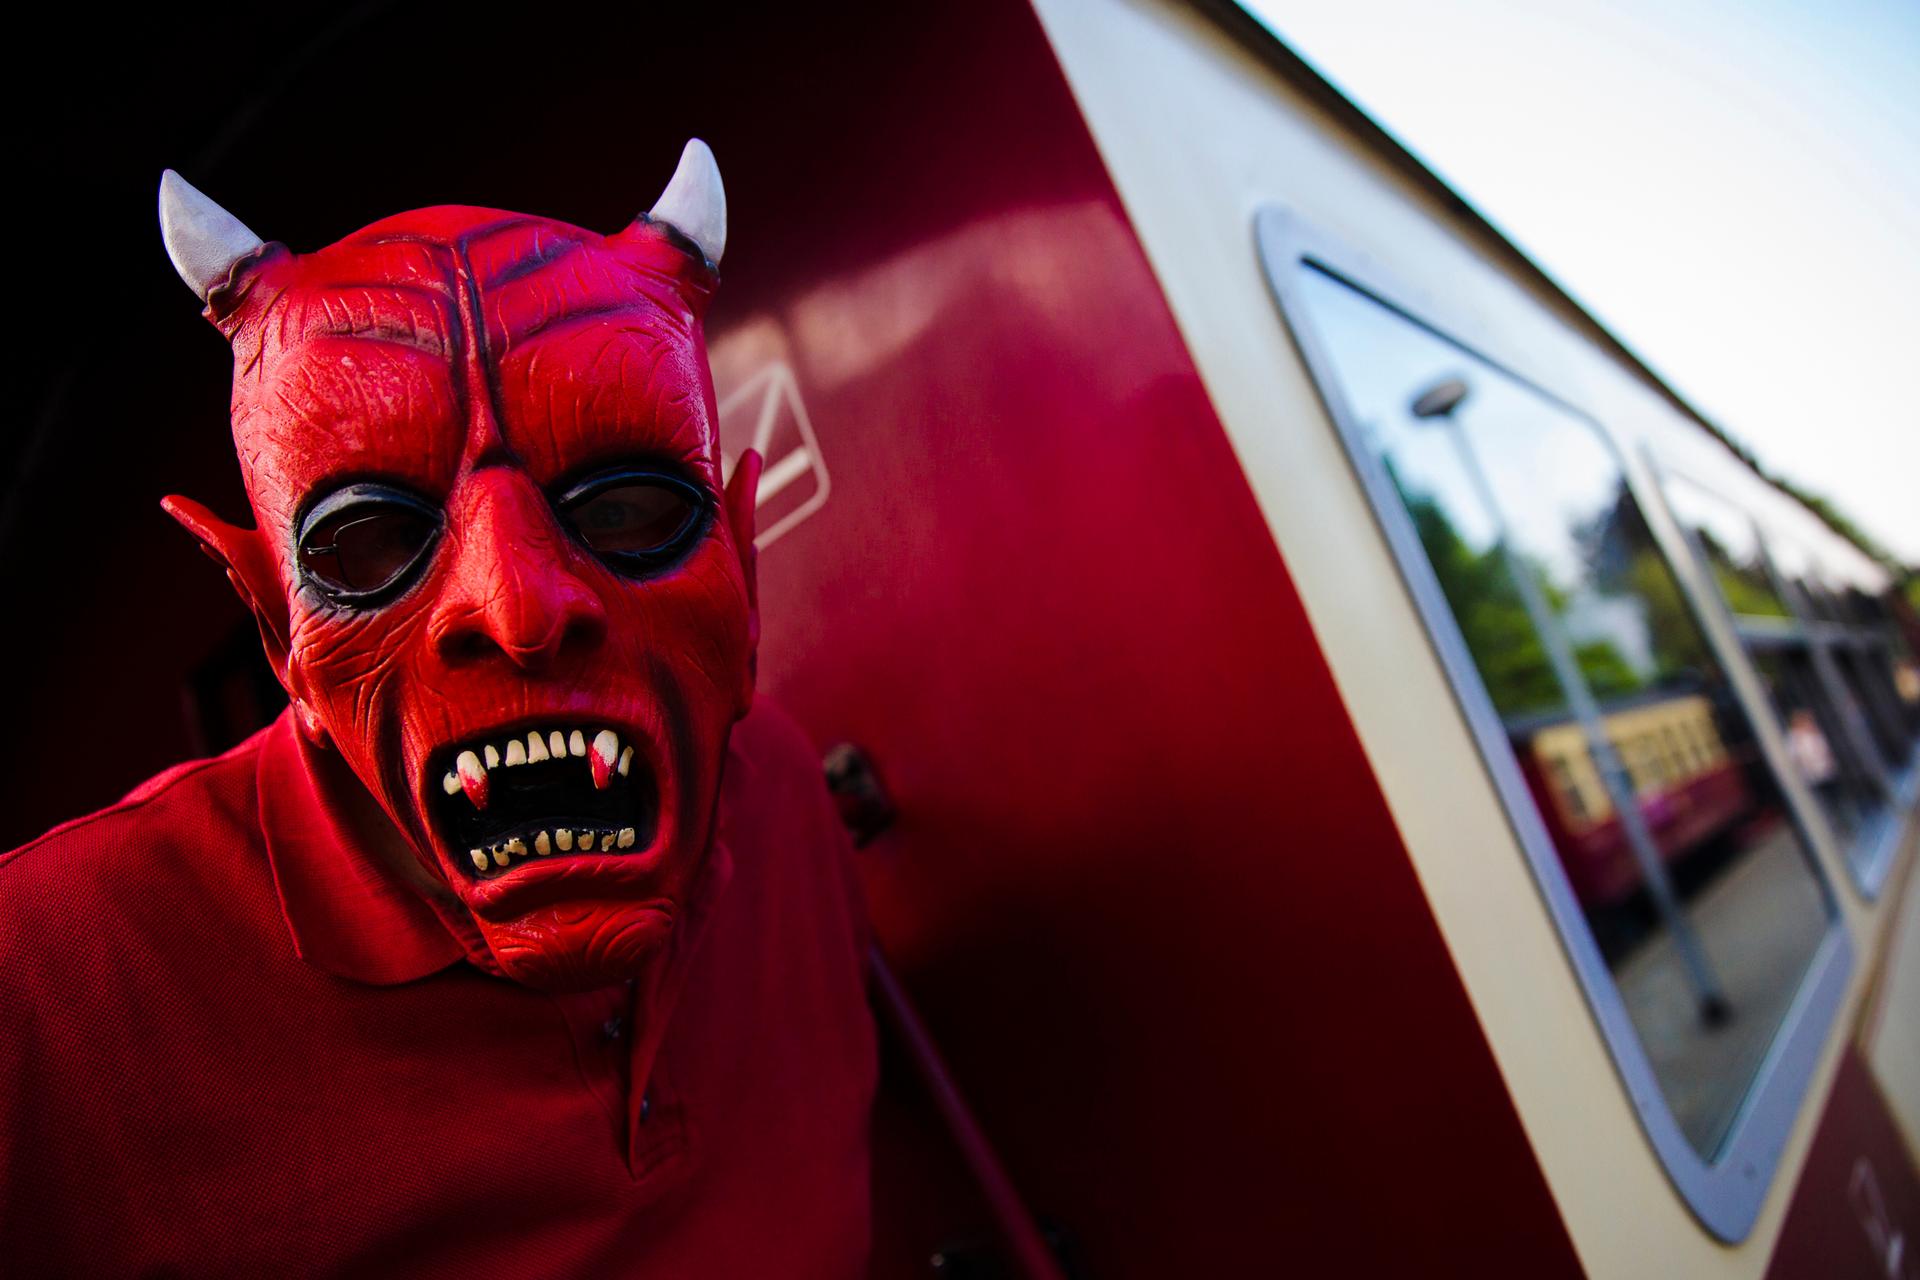 A man with devil make-up takes part in celebrations marking the “Walpurgisnacht” pagan tradition, in Germany. 